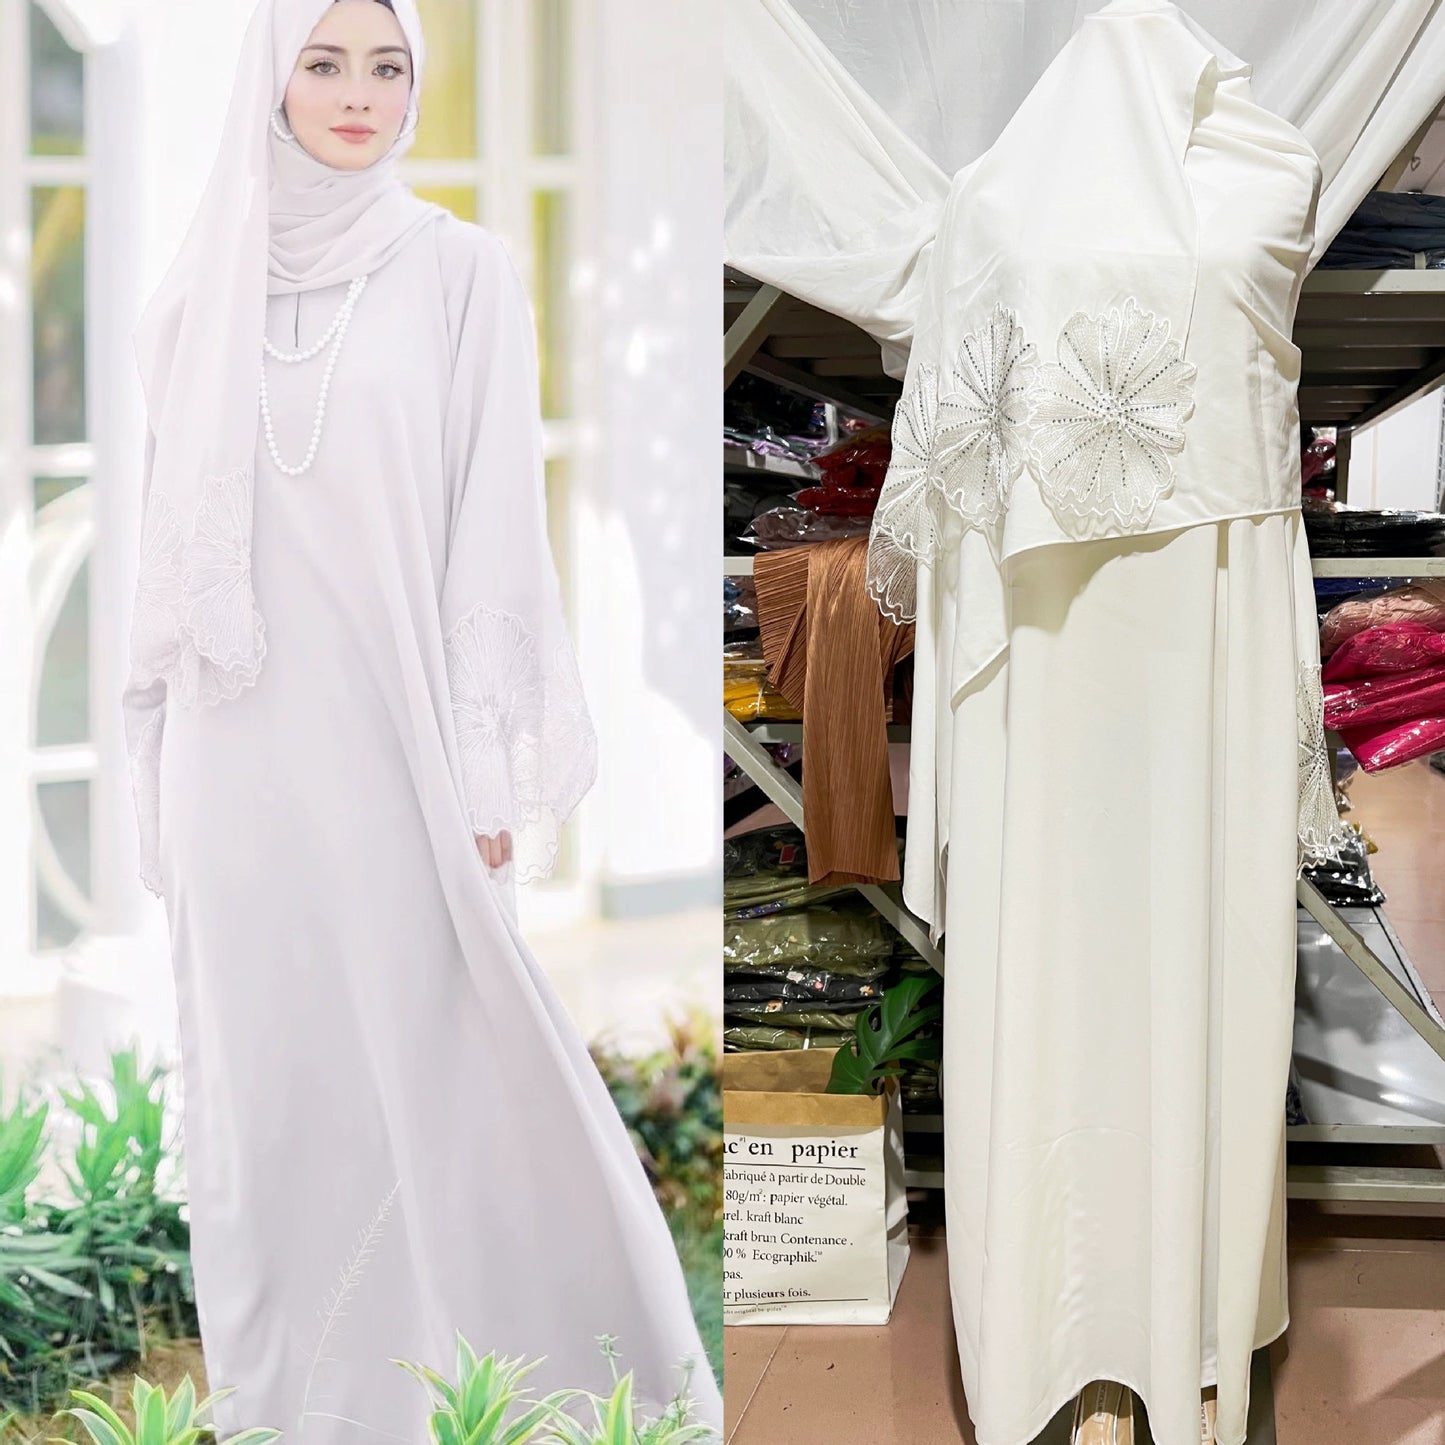 Abaya with embroidery details on edging + Scarf (Shipping not included)